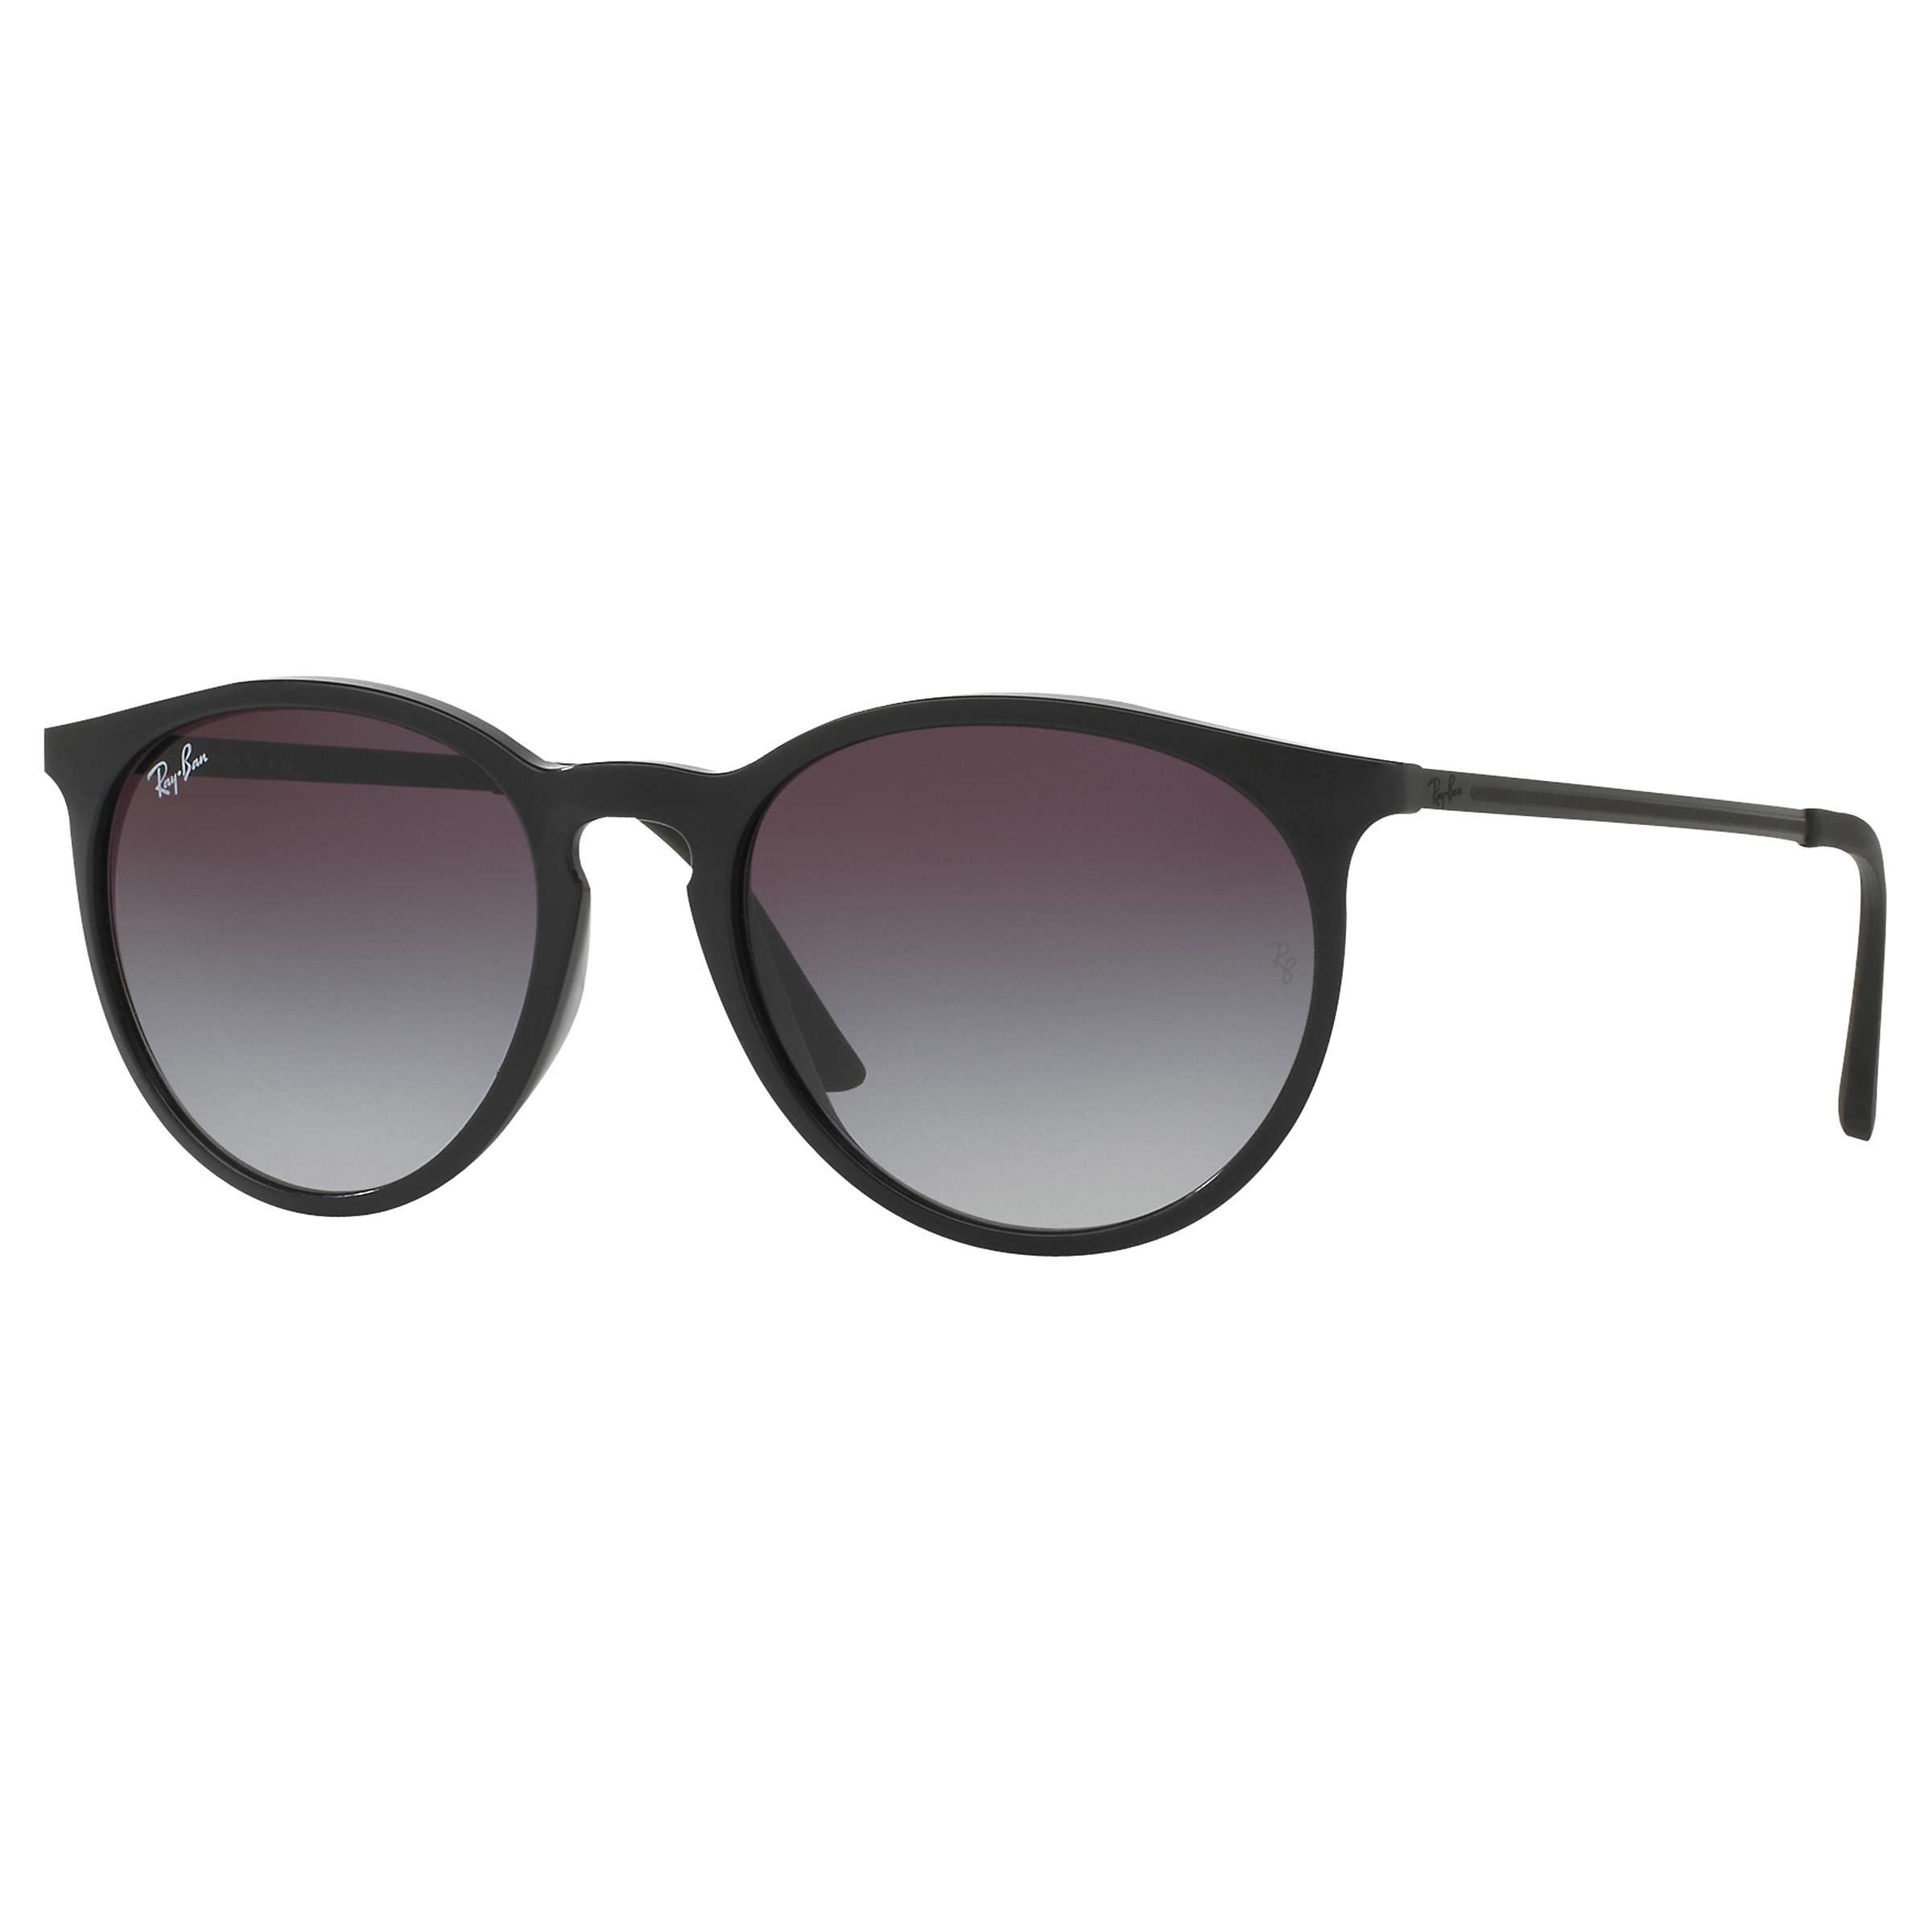 Buy Ray-Ban RB4274 Oval Sunglasses Online at johnlewis.com